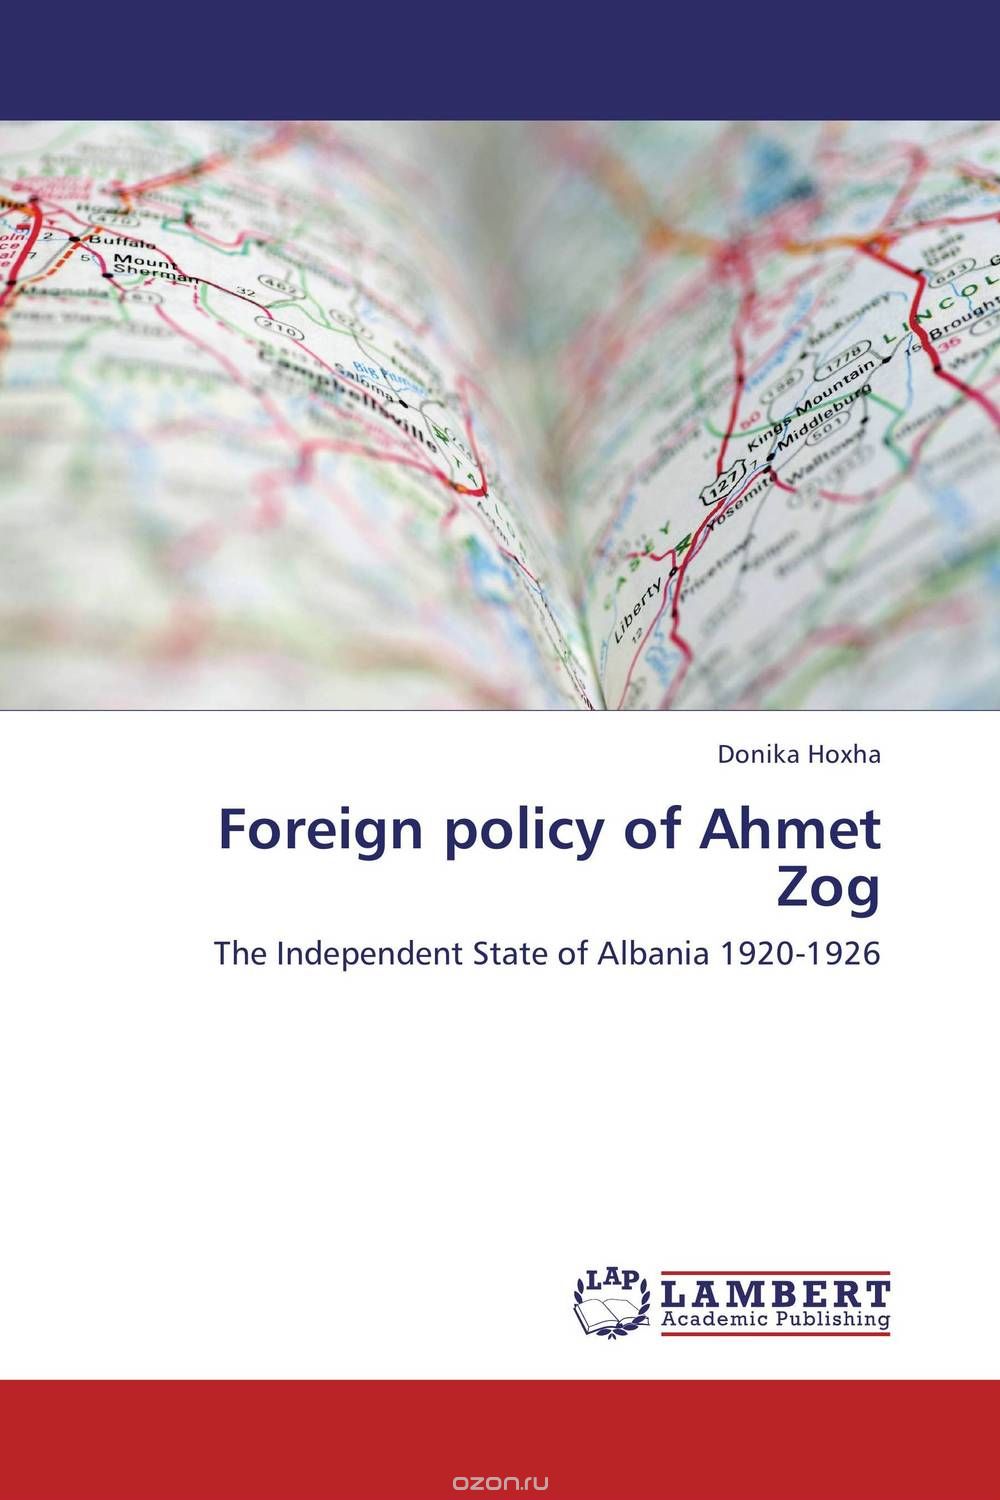 Foreign policy of Ahmet Zog